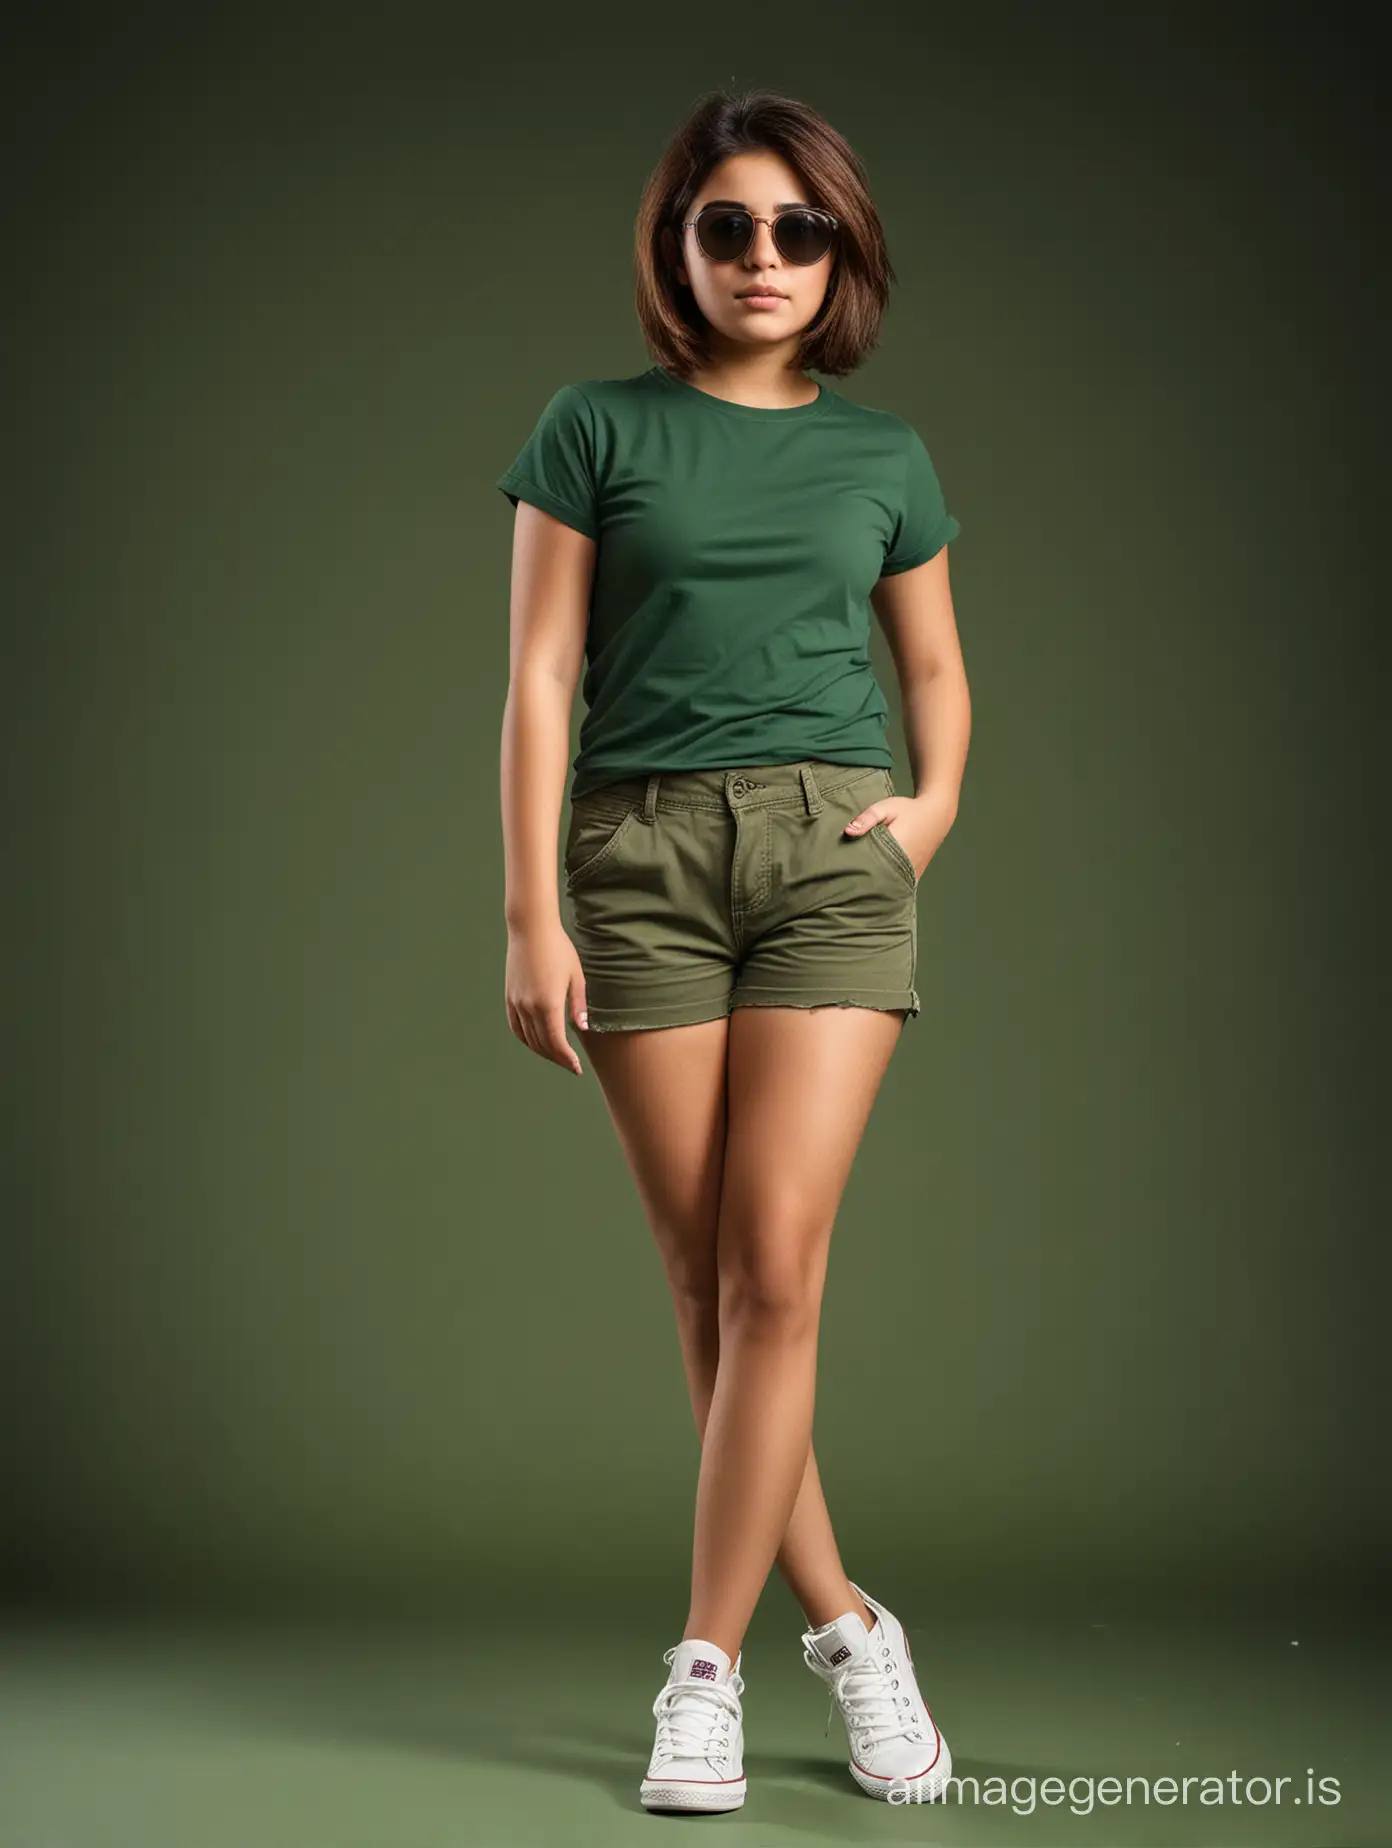 iranian a little fat teenage girl, wearing green T-shirt and green short pants, white converse, brown short hair, black sun glasses, full body shot, fantasy cream solid background, dramatic lighting